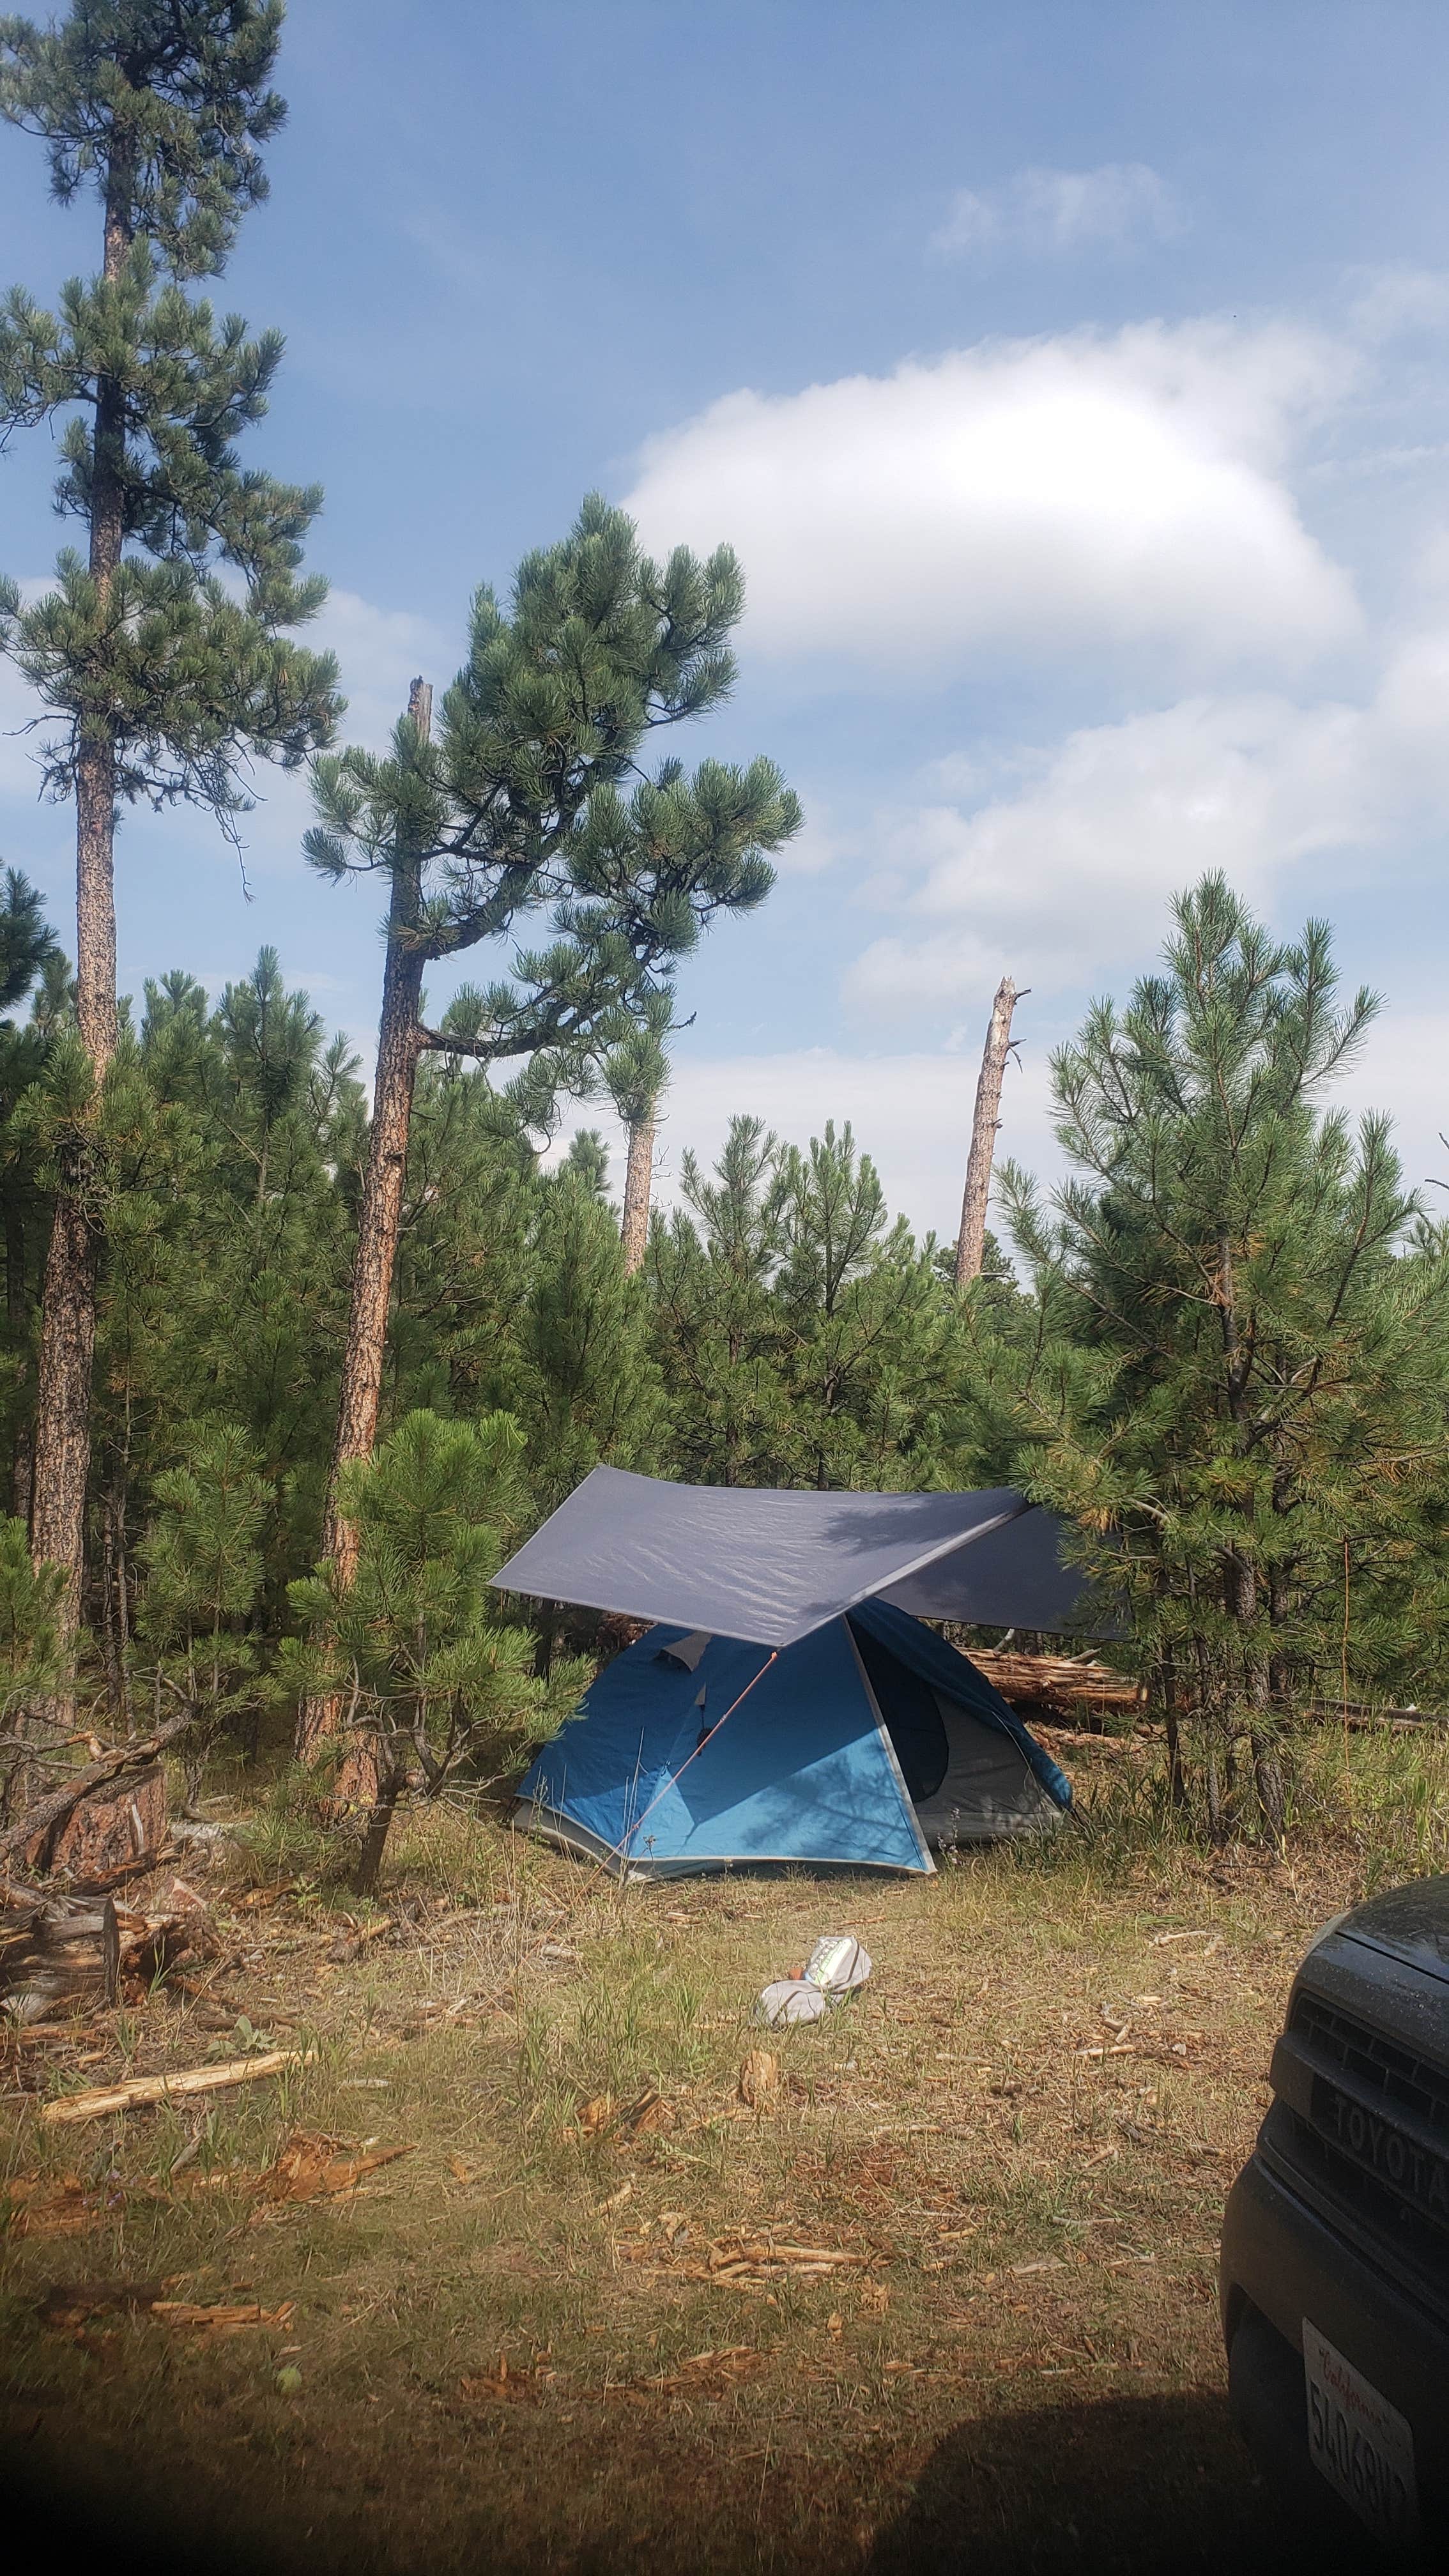 Camper submitted image from RD 356 Dispersed Site Black Hills National Forest - 4